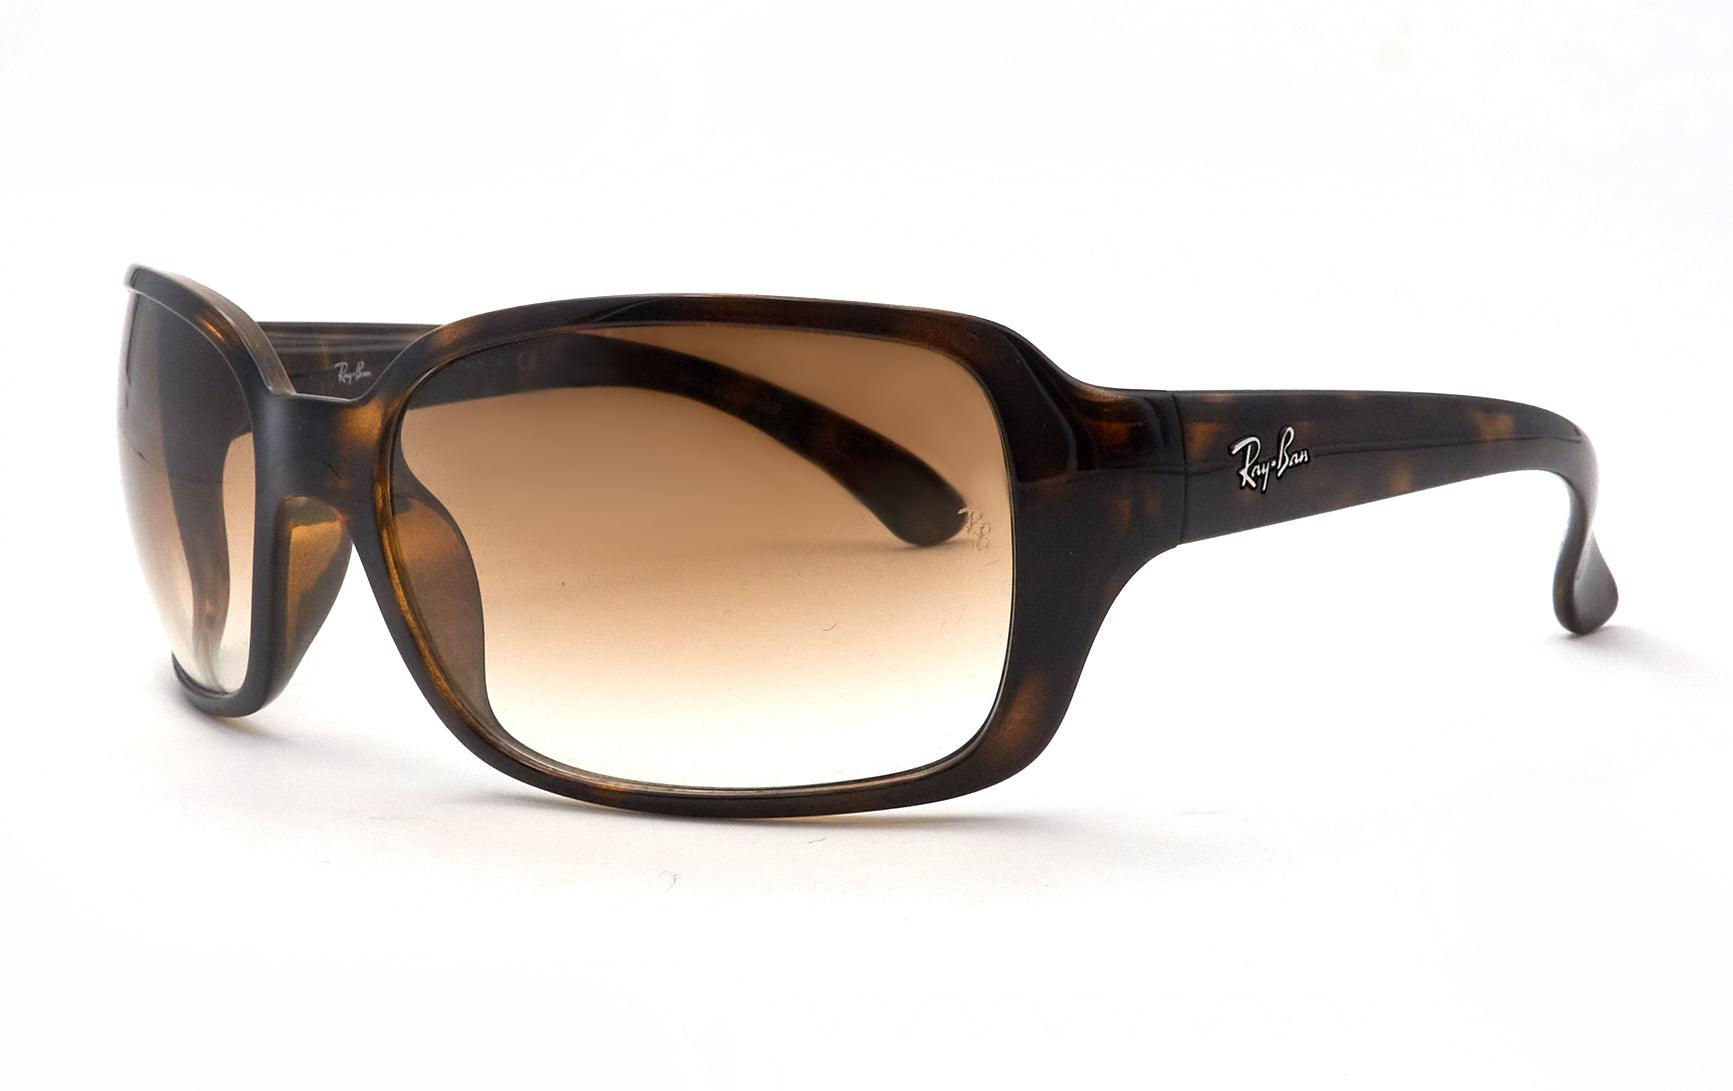 RAY-BAN 4068 710 51 - Opticas Lookout